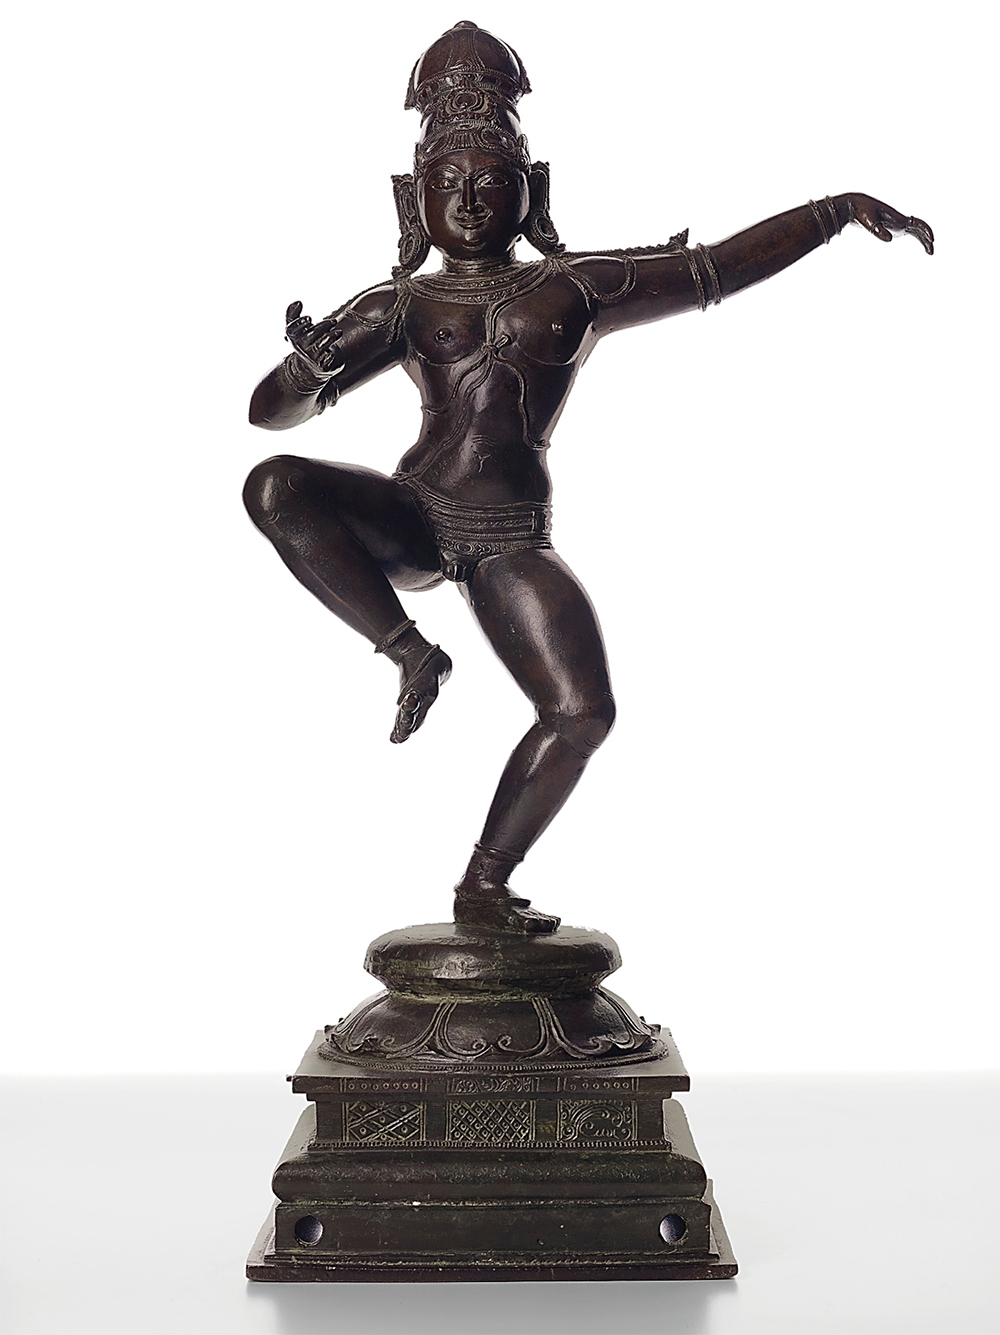 The Boy Krishna Dancing
circa 1500–1600
southern India
bronze
Lent by a New York collector
H. 68.5 cm